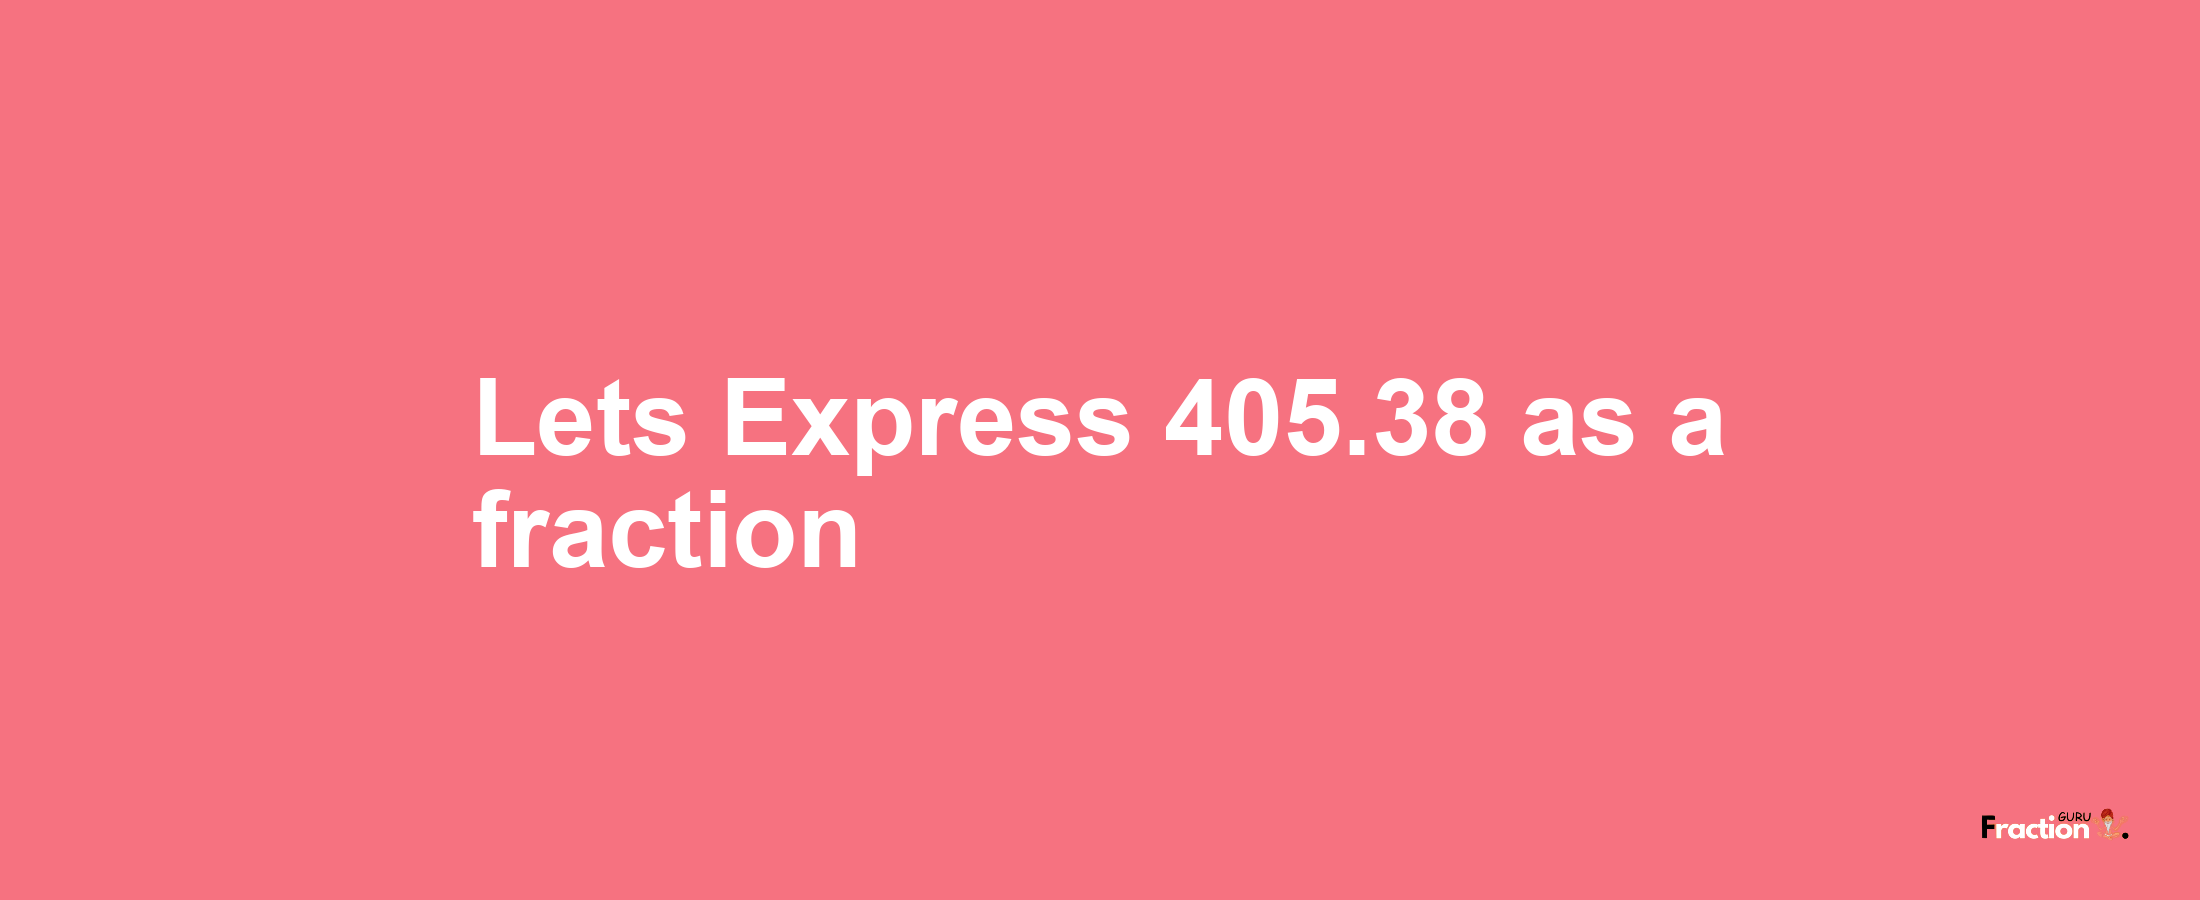 Lets Express 405.38 as afraction